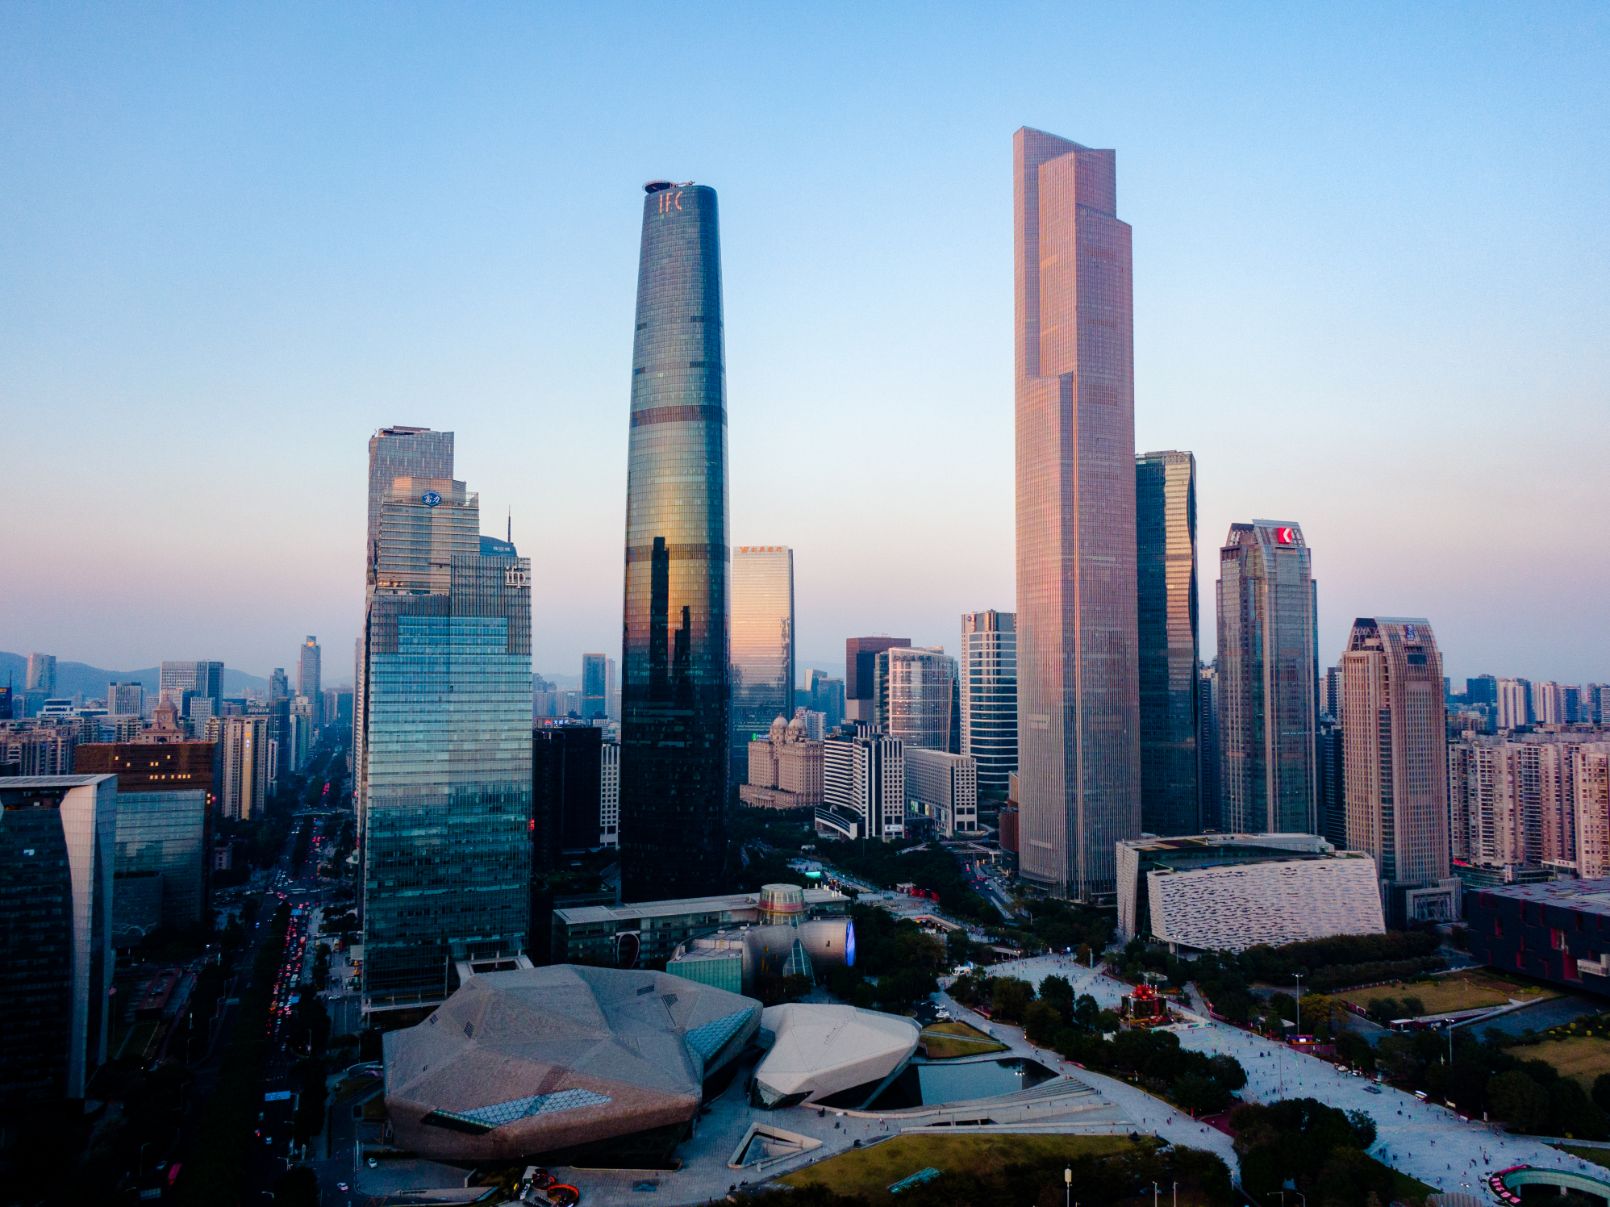 Guangzhou CTF Finance Centre - 7th tallest building in the world